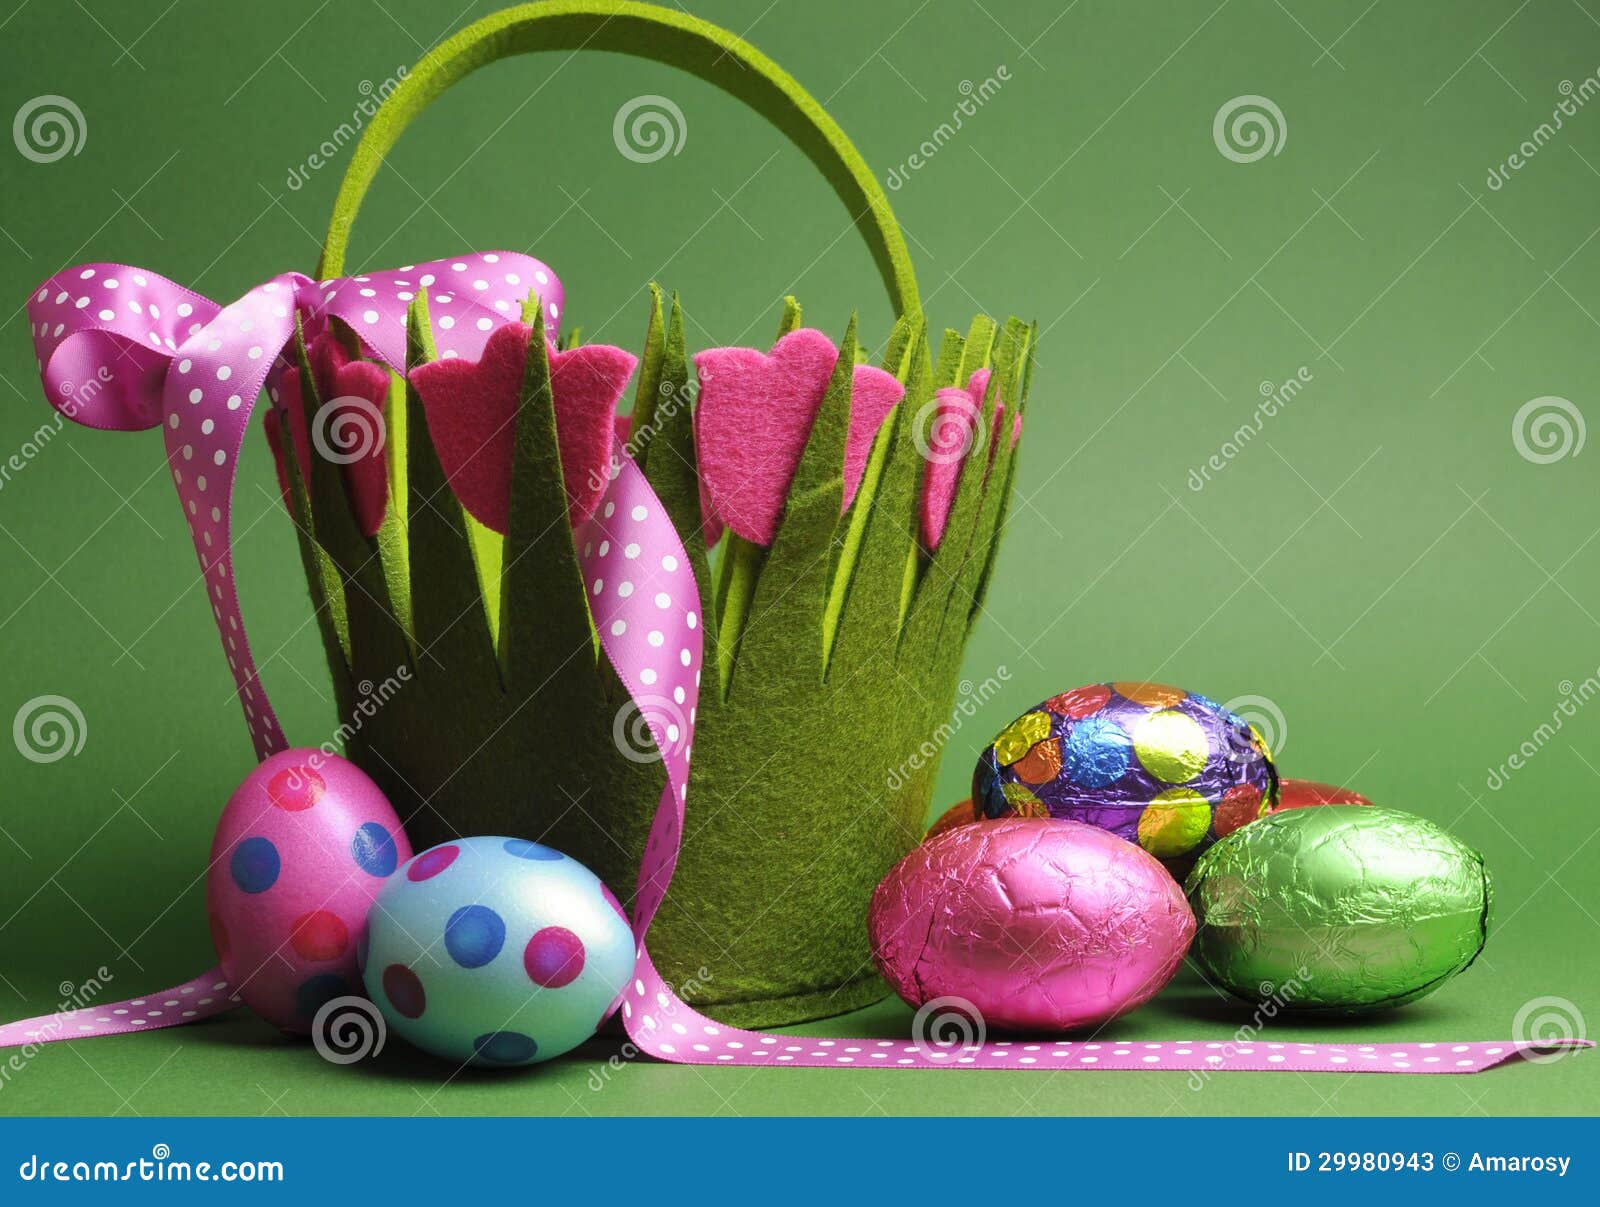 easter egg hunt with colorful spring theme polka dot carry basket bag and chocolate easter eggs